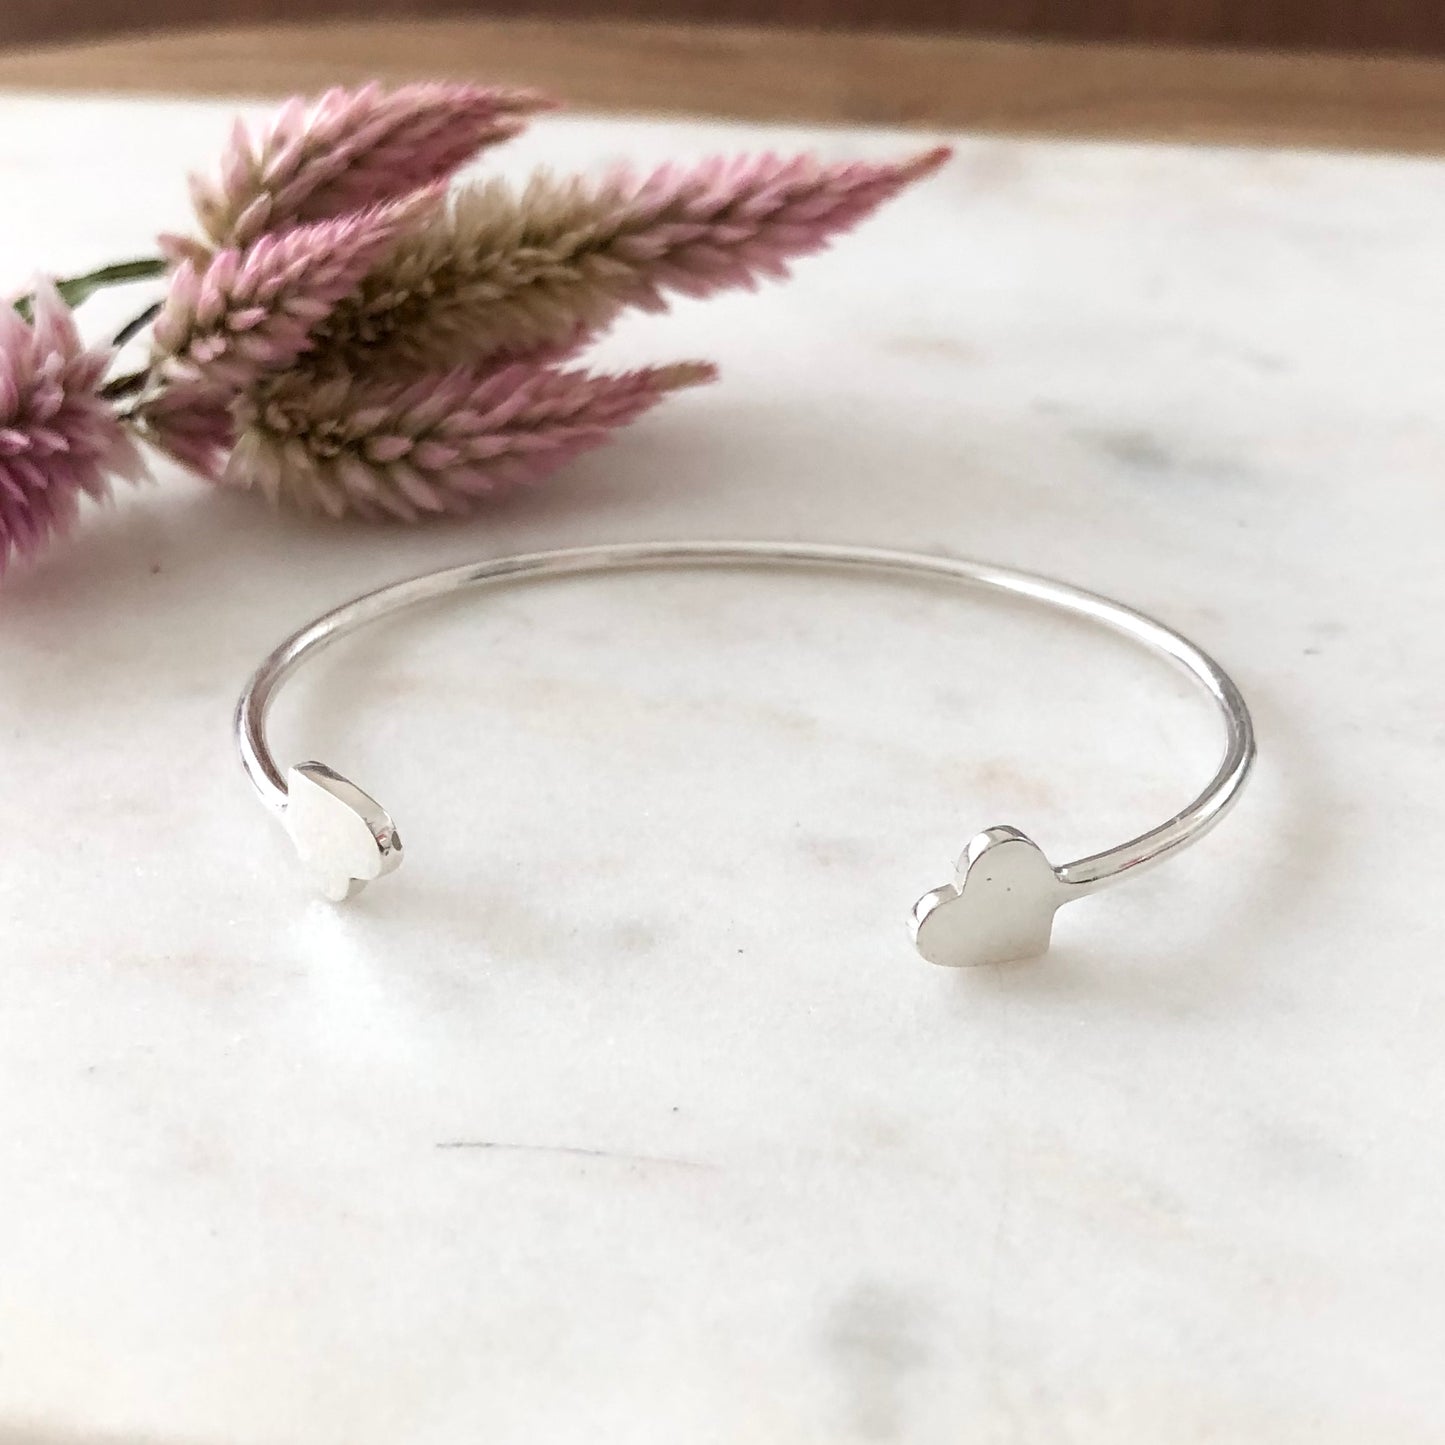 Silver cuff heart bracelet displayed on marble with a flower in the background.